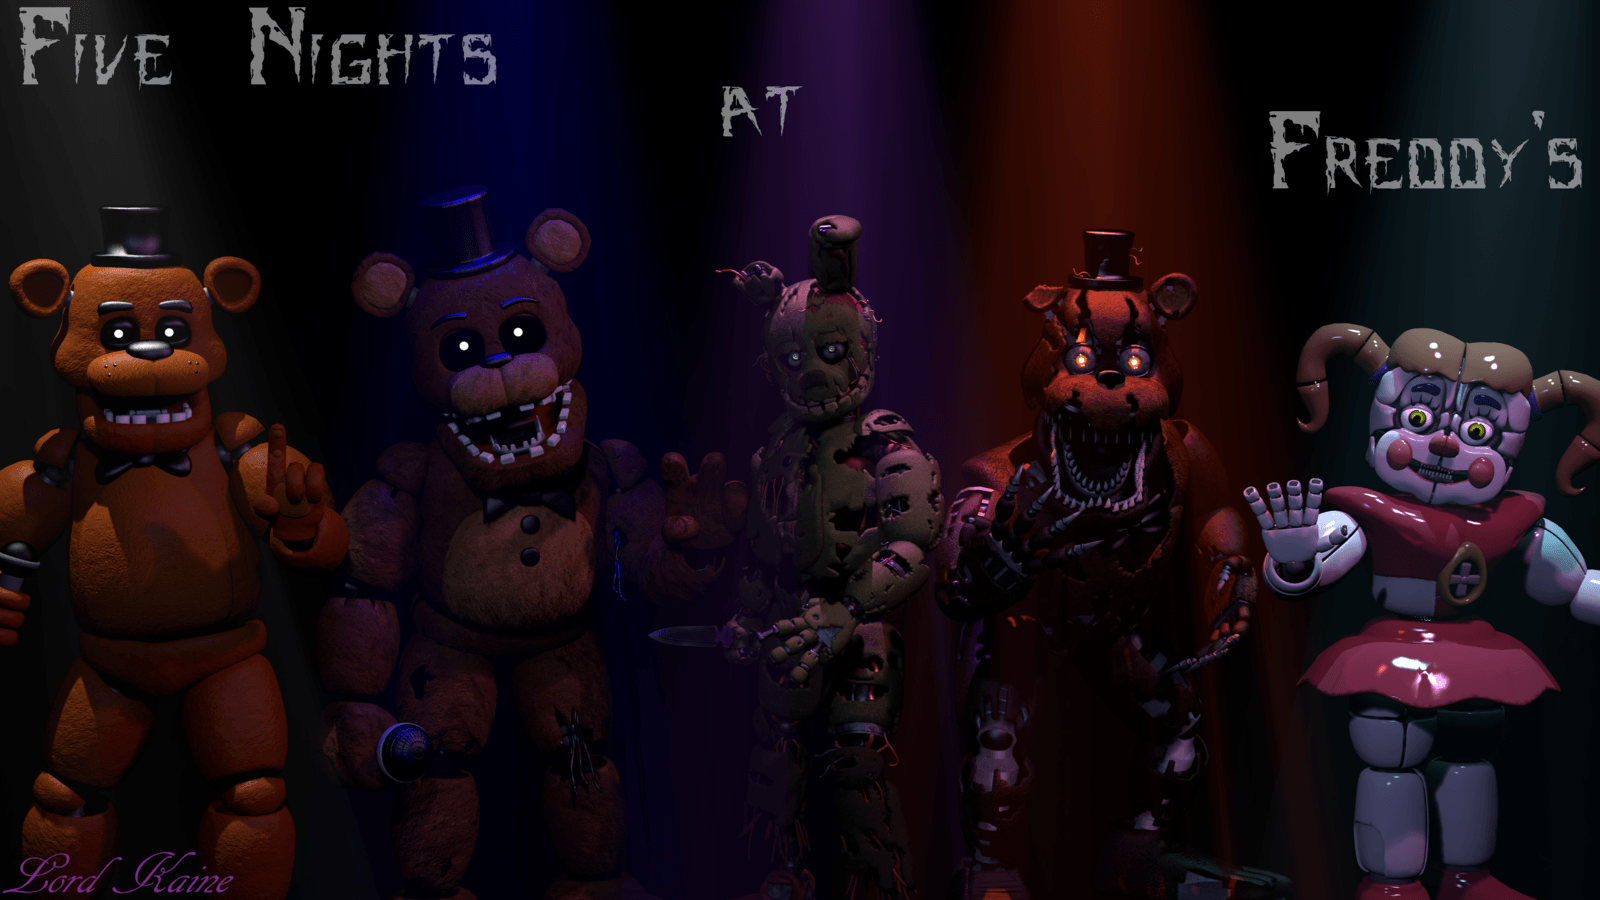 Five Nights At Freddy&;s Wallpaper By Lord Kaine